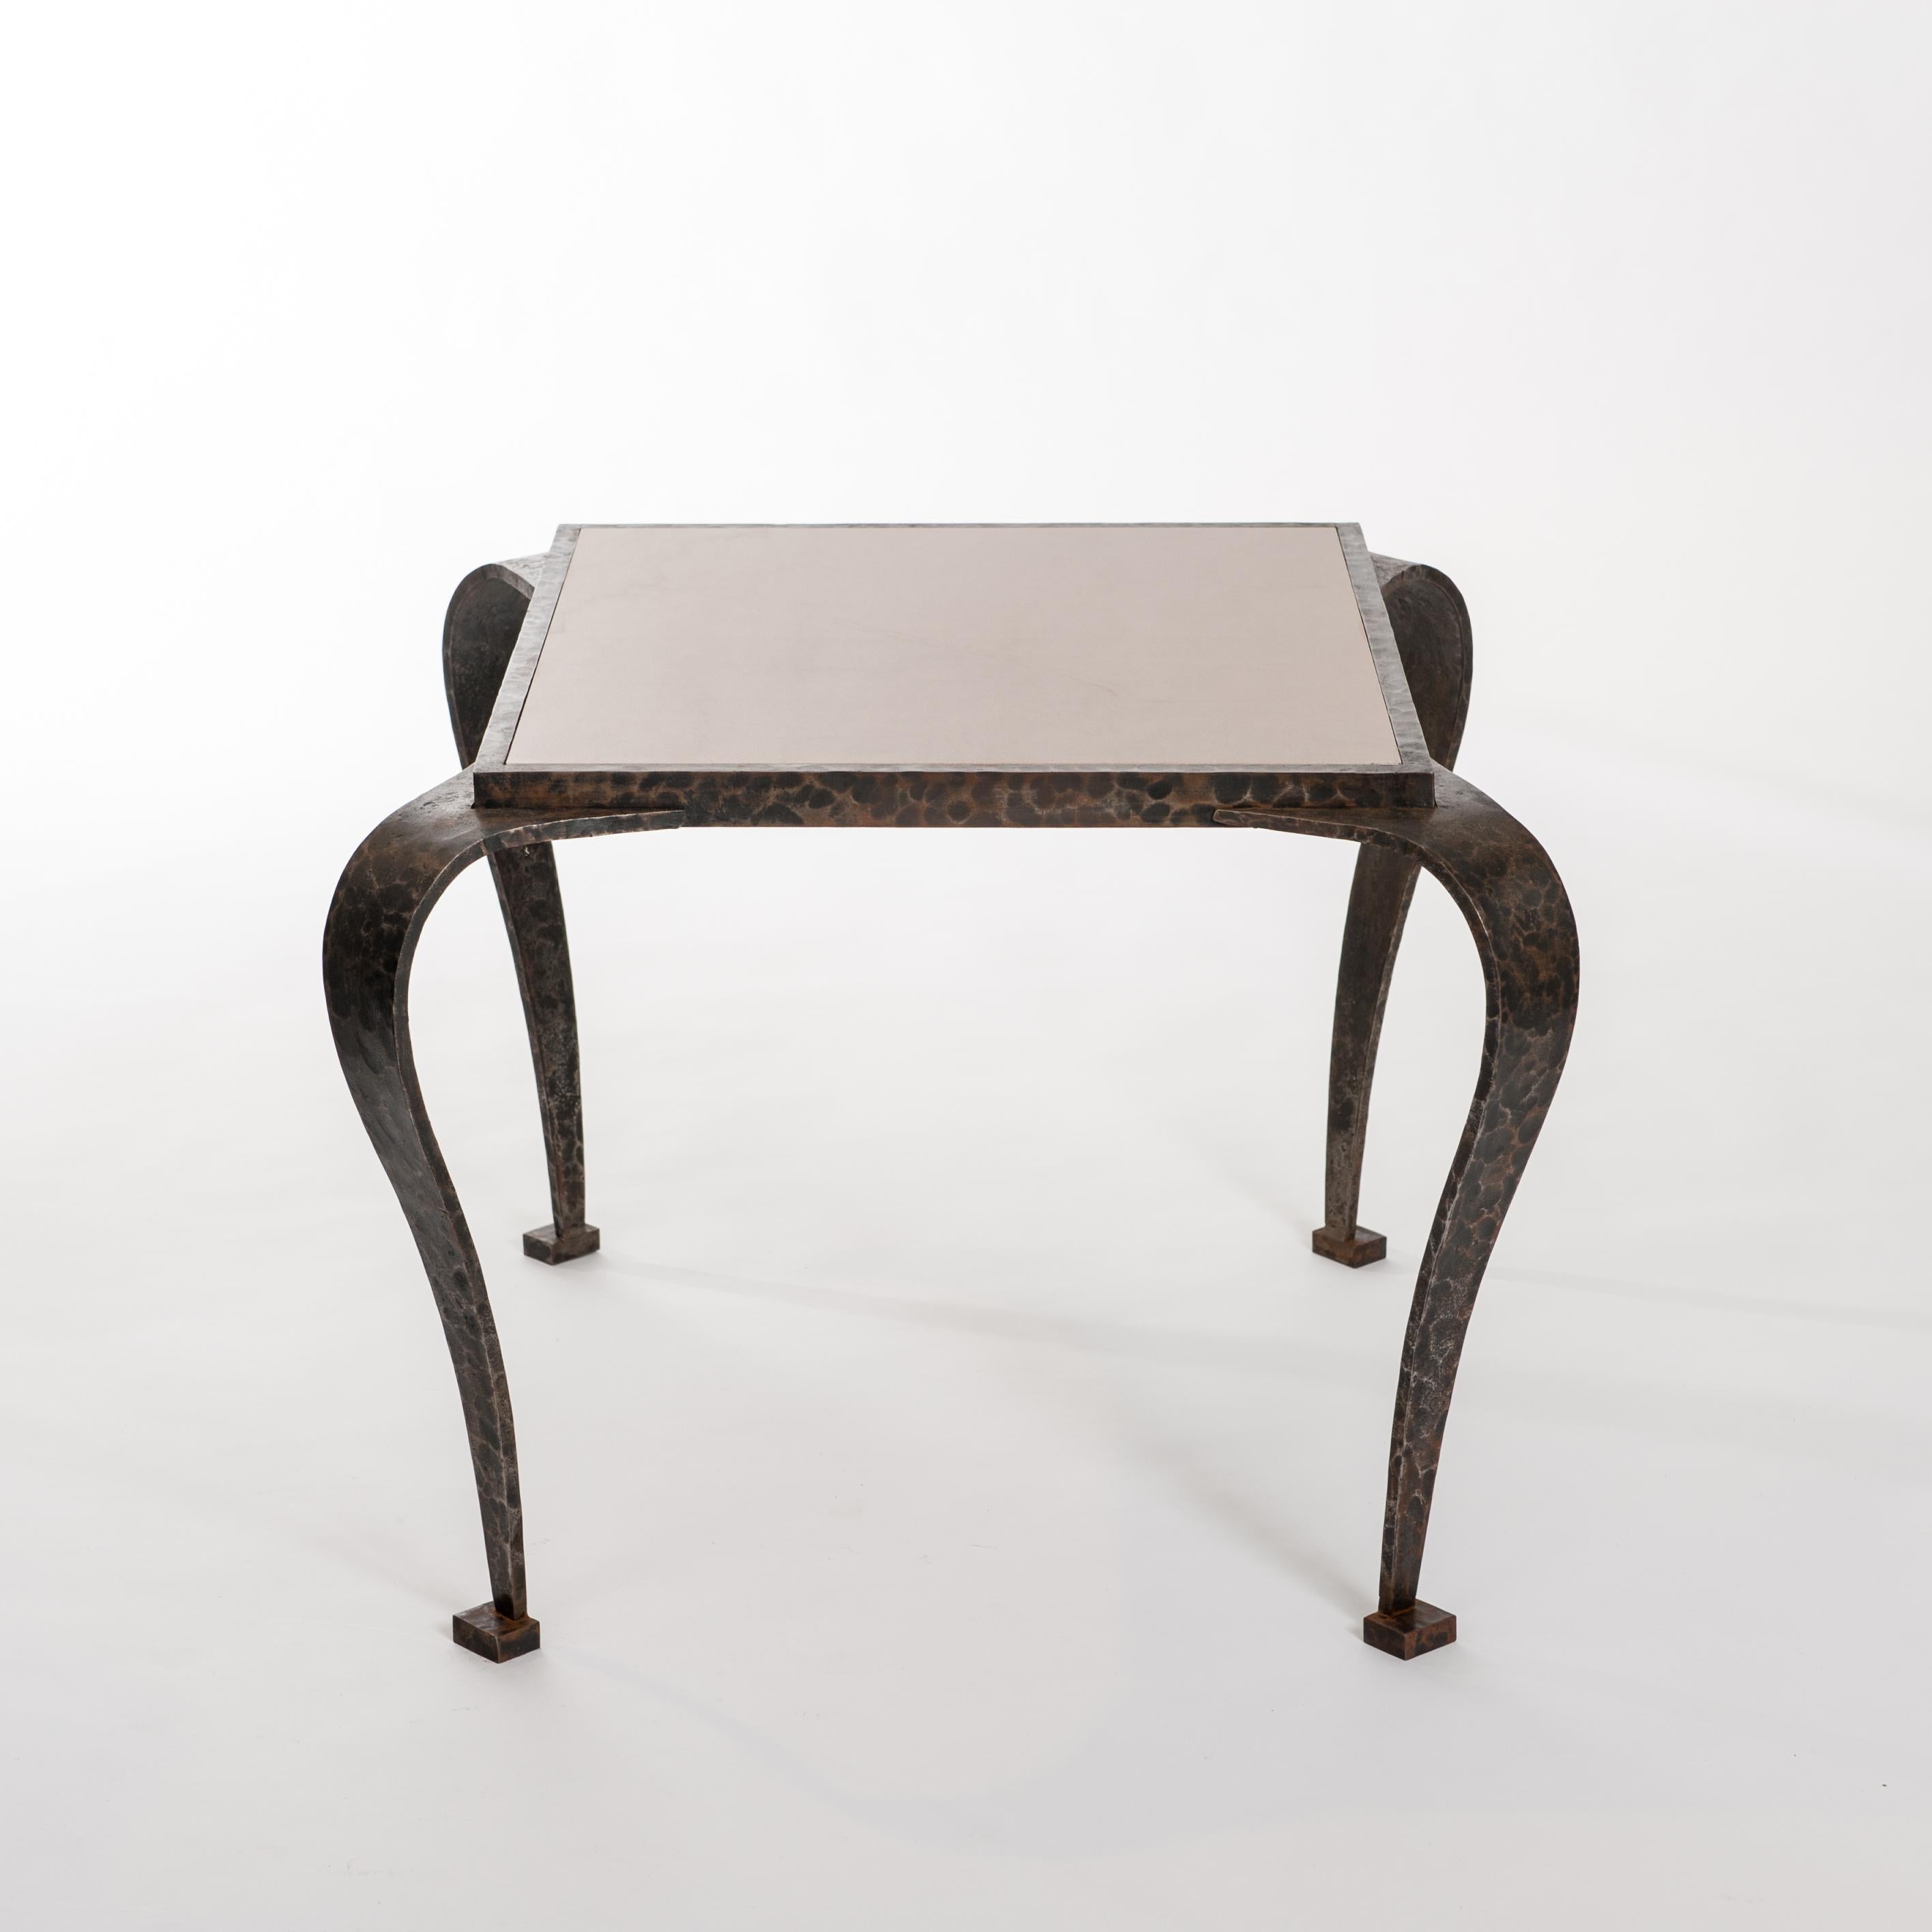 Impressive iron Art Deco side table with hammered surface and elegant curved legs.
The side table displays an extraordinary impressive look due to its hand forged, hammered surface and the marble top.
The rusty brown-grey color of the waxed iron